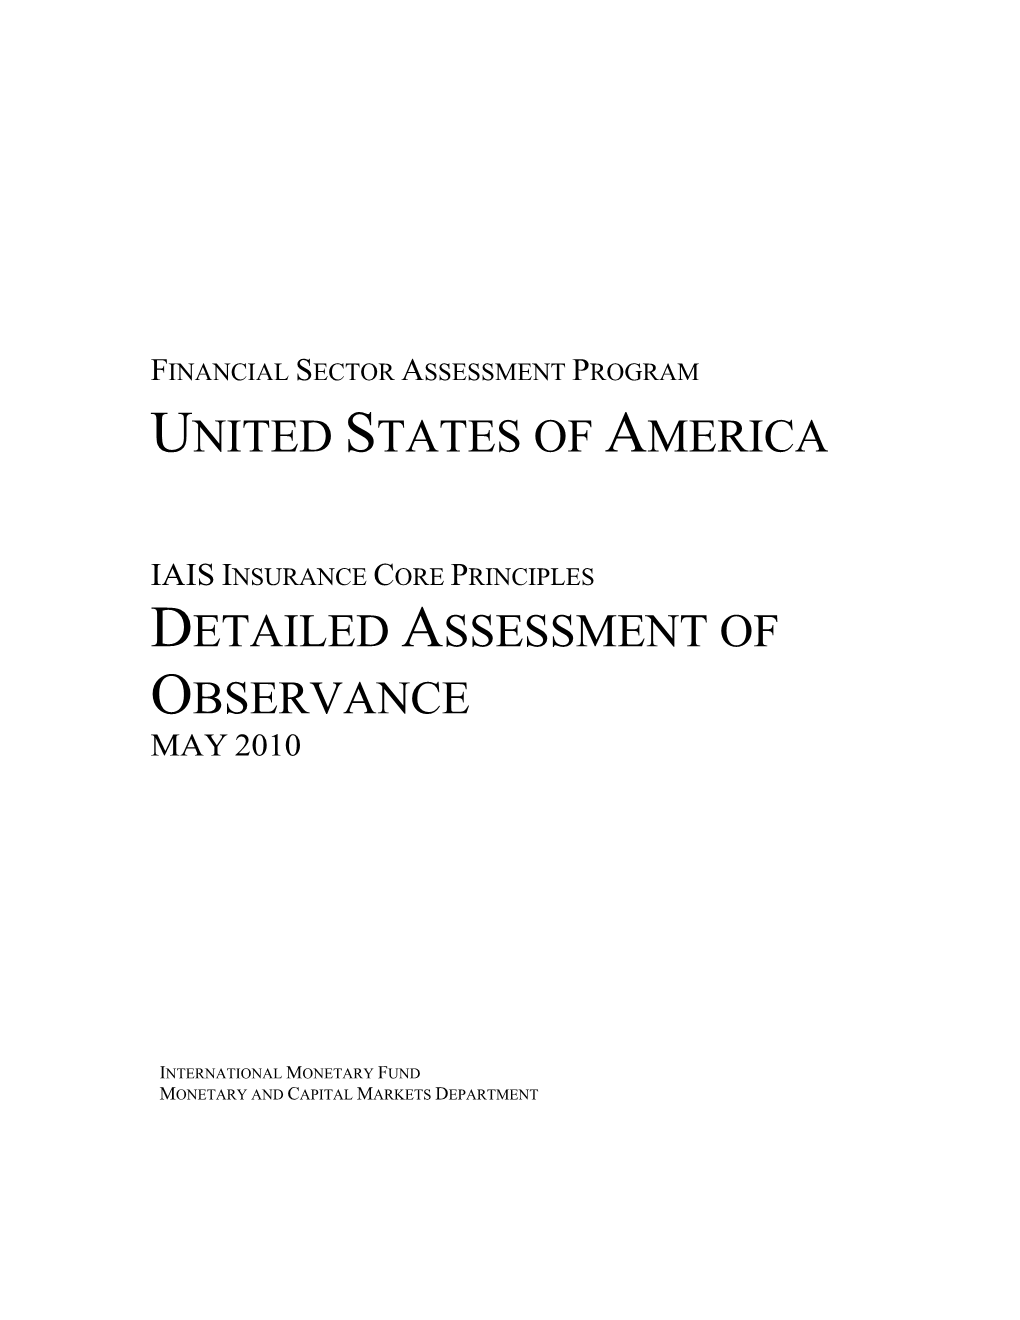 Financial Sector Assessment Program United States of America